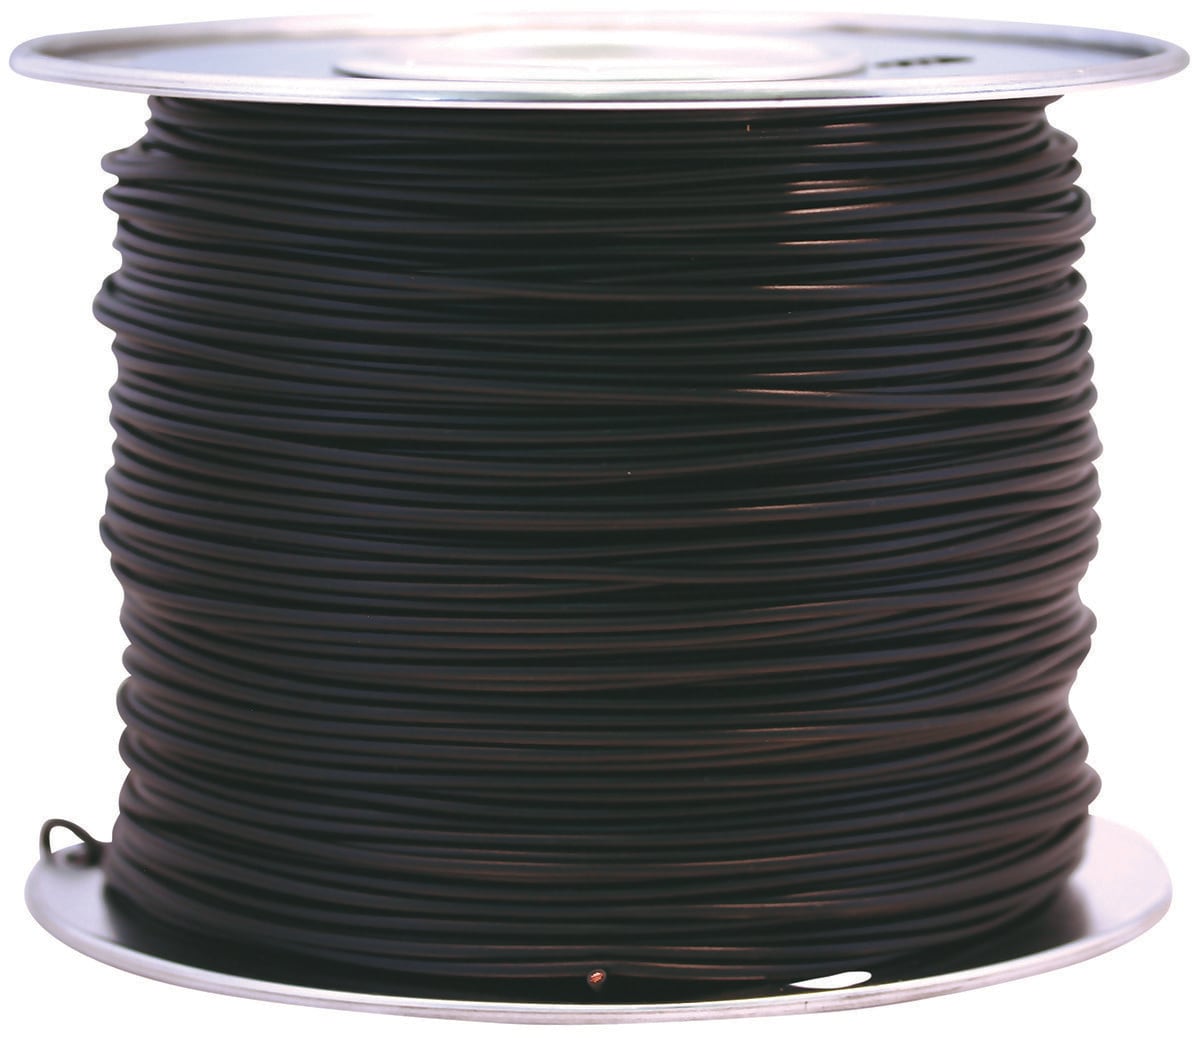 Contradicción Stratford on Avon helado Southwire 100-ft 10-AWG Stranded Black Gpt Primary Wire in the Primary Wire  department at Lowes.com